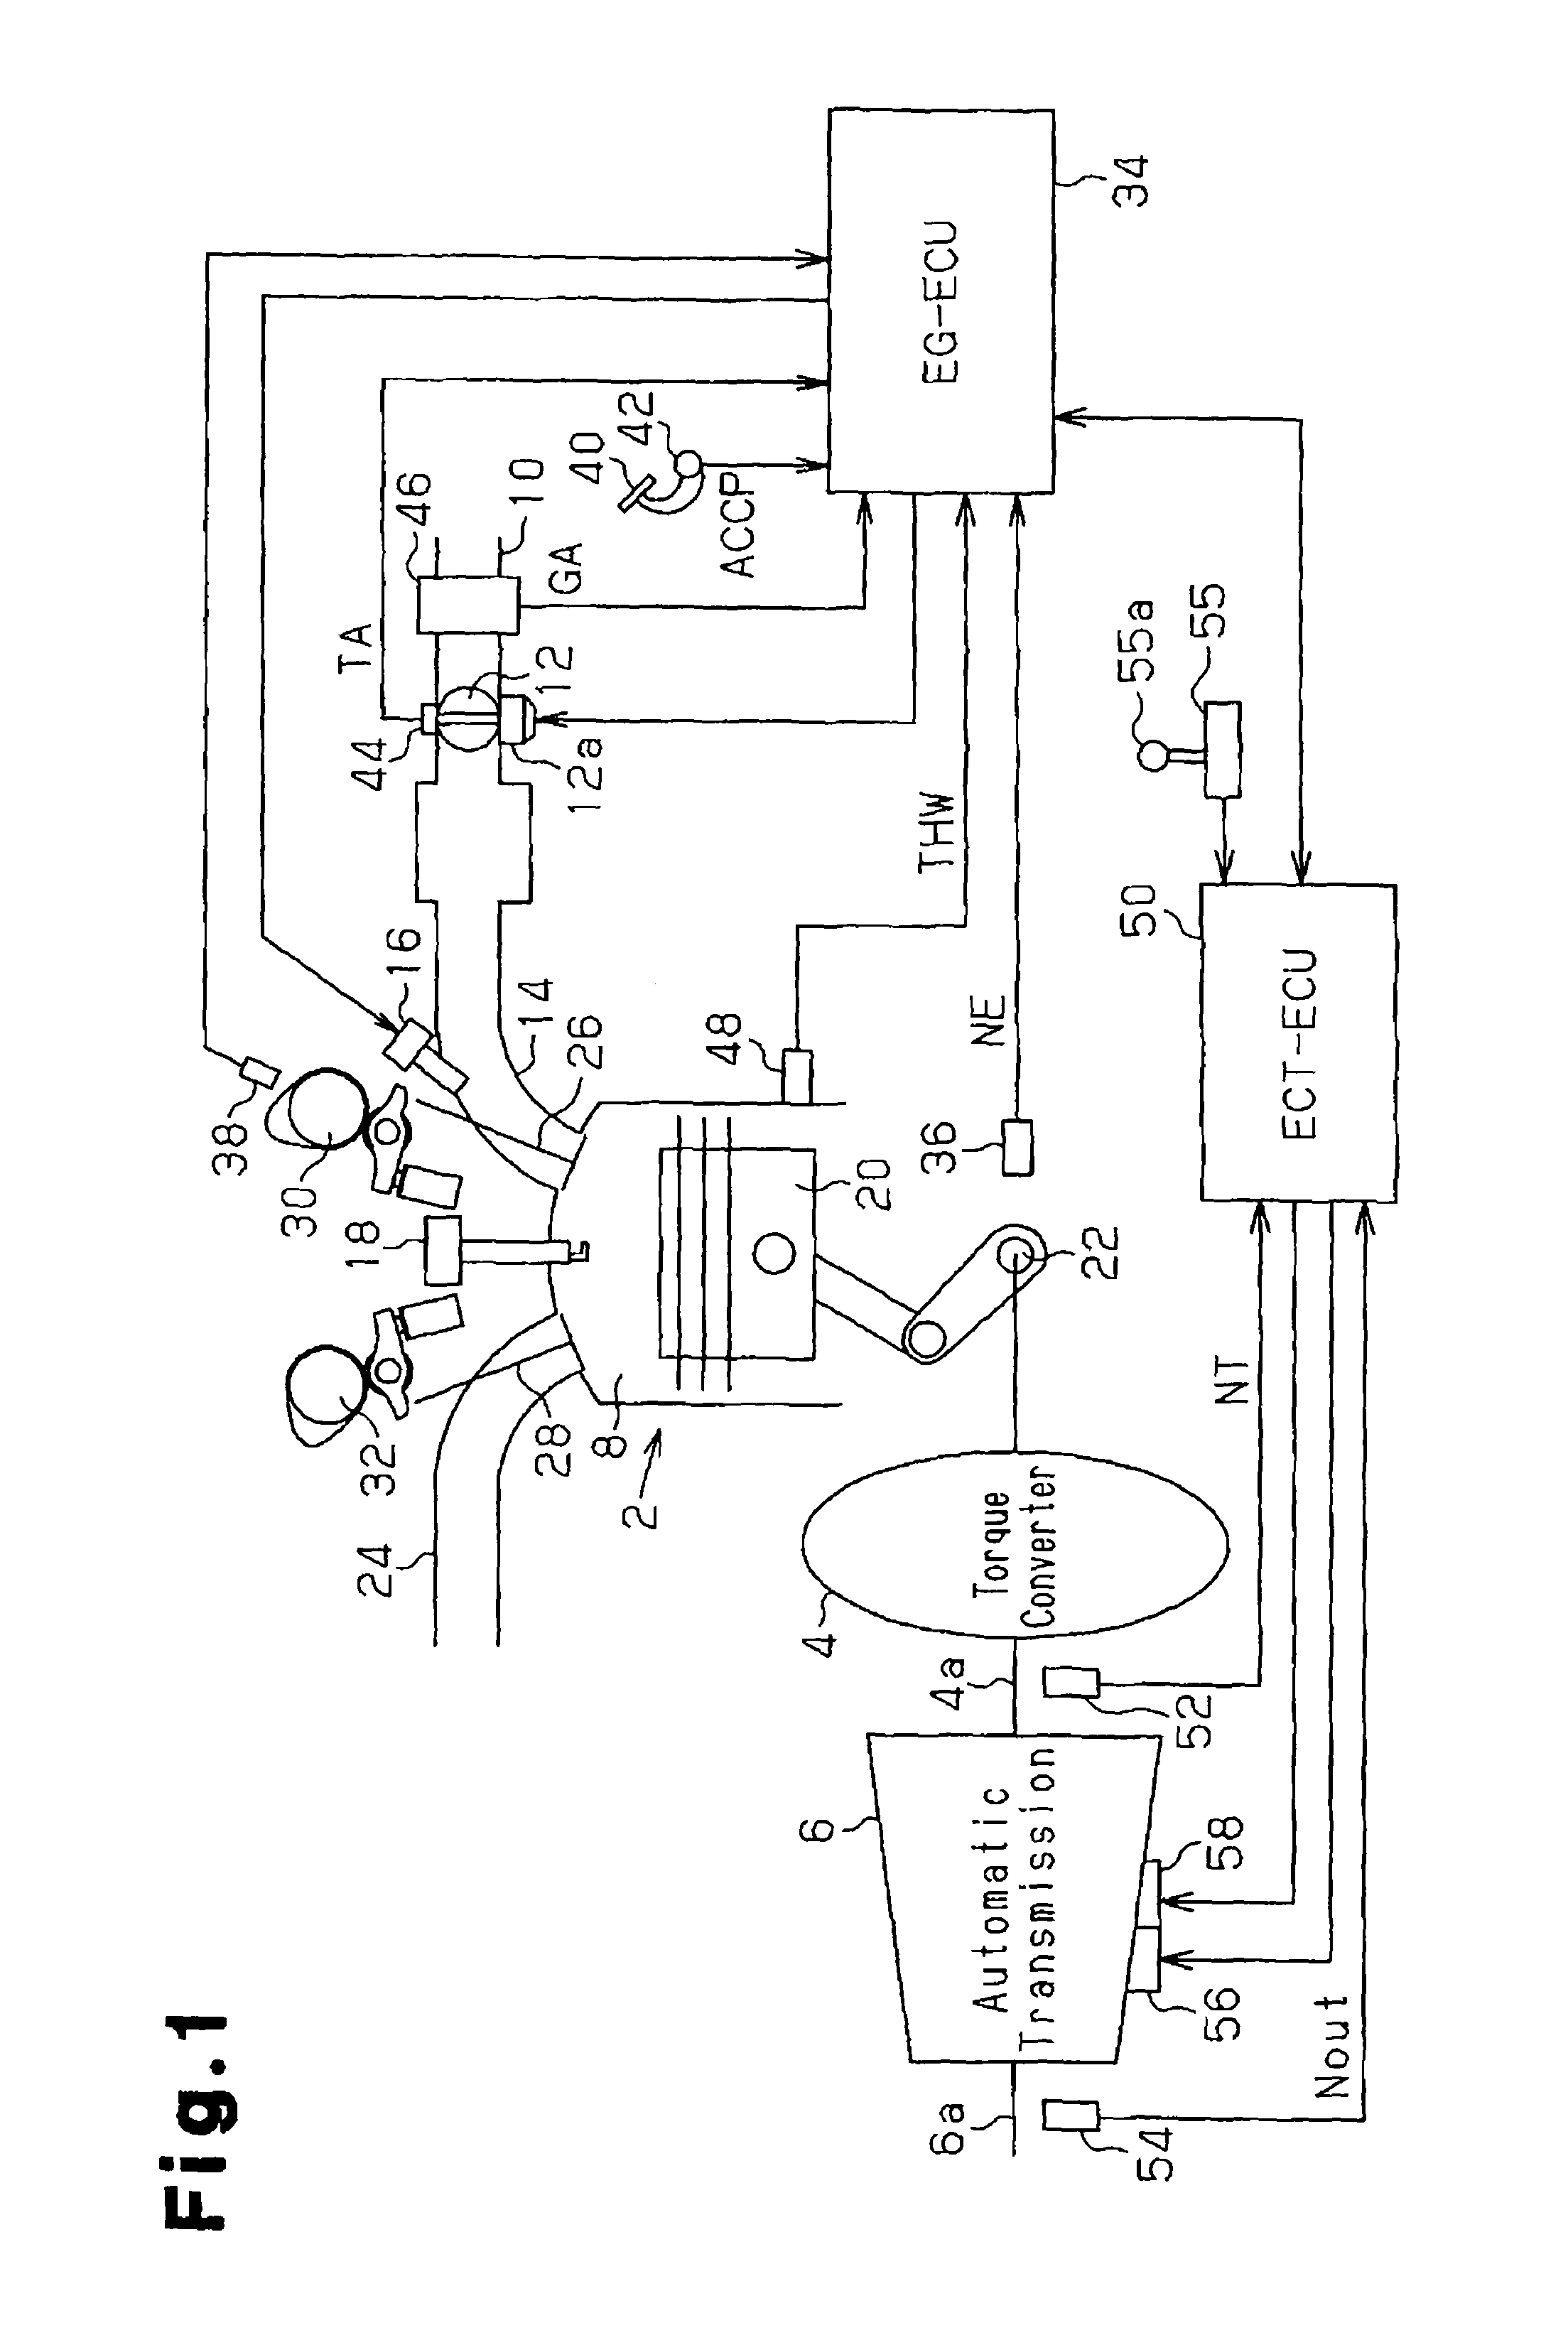 Assumption torque setting device, automatic transmission controller, and method for learning internal combustion engine delay model